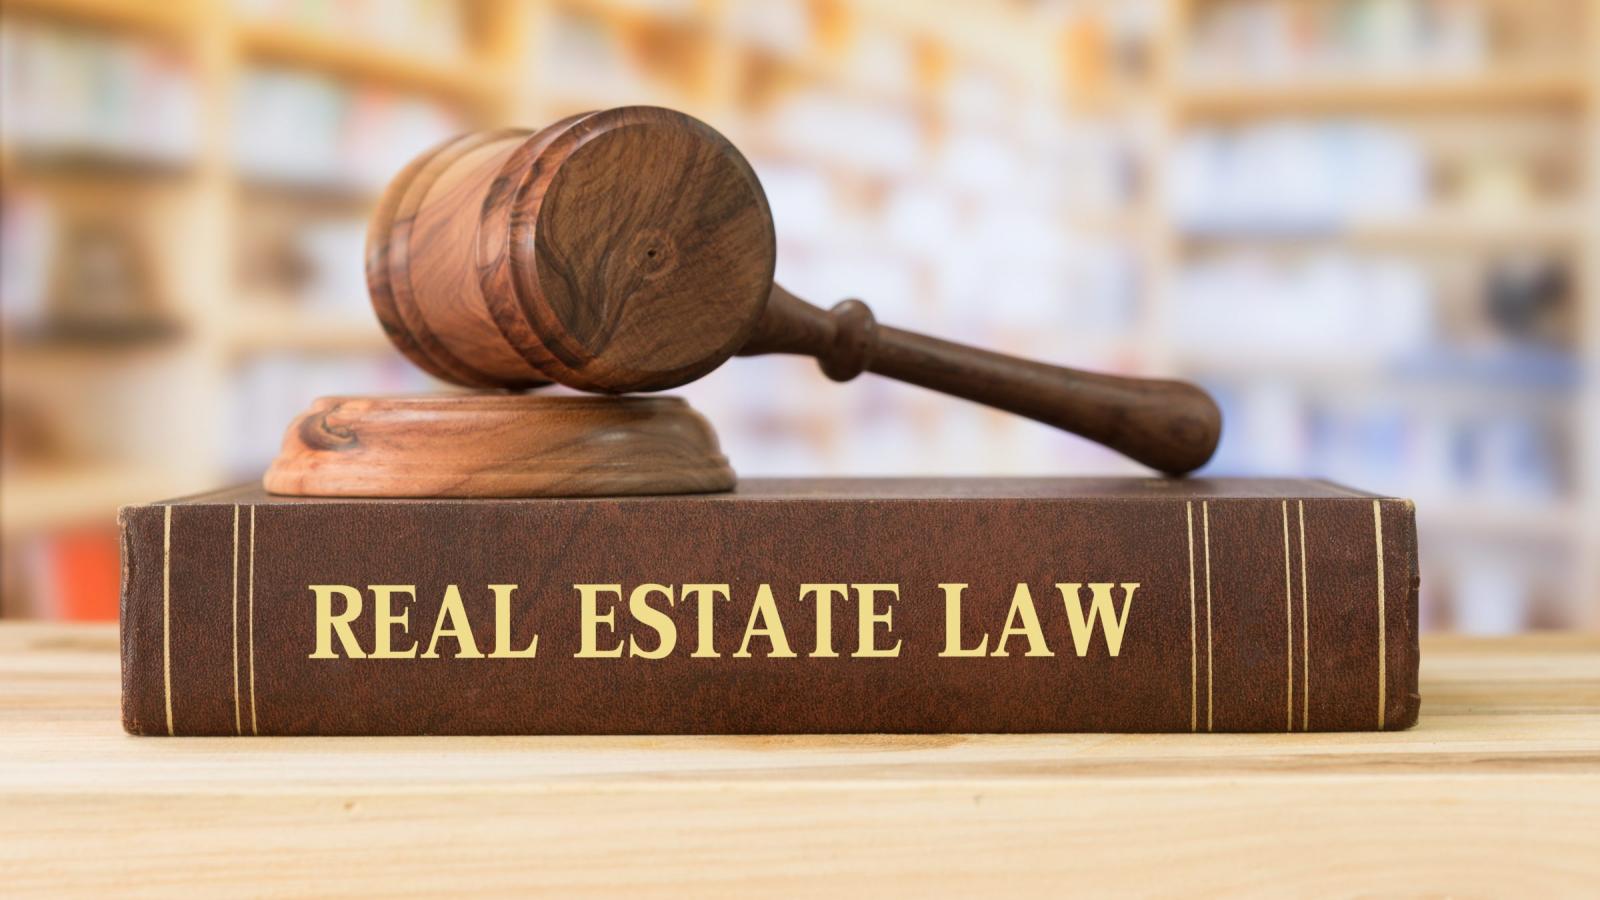 Real Estate Laws